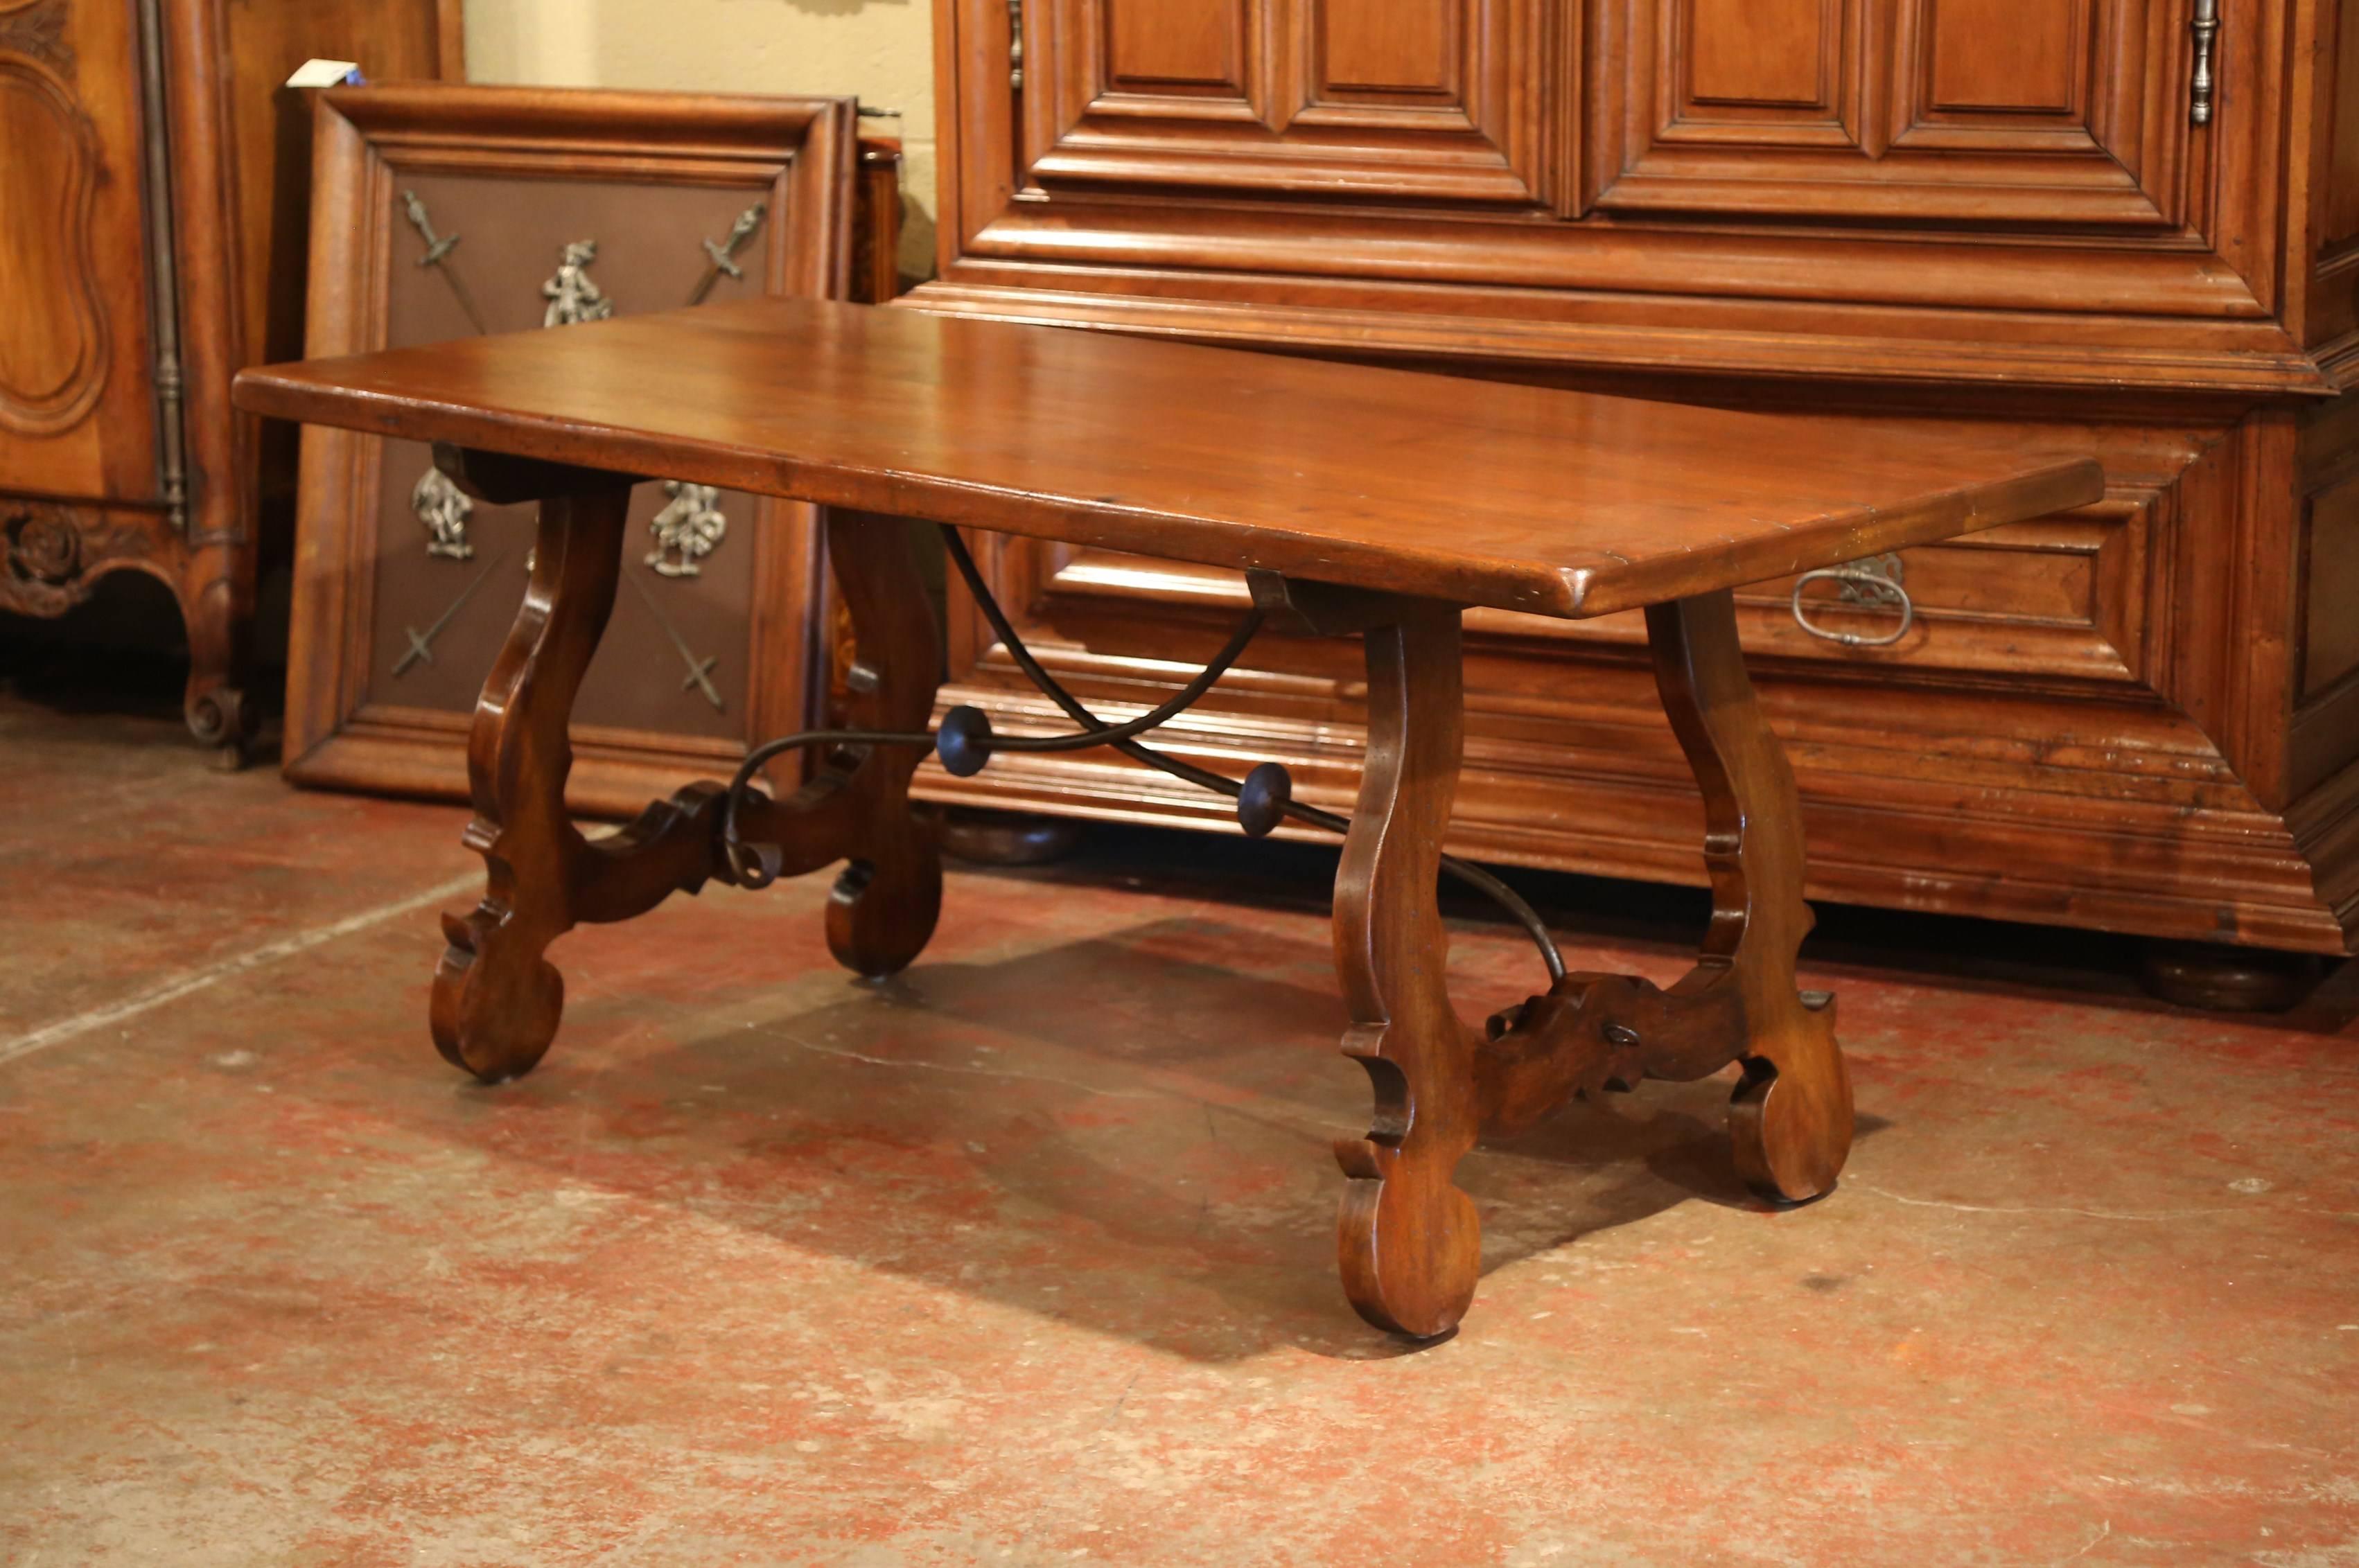 Elegant antique fruitwood farm table from Spain; crafted circa 1920, the trestle table features a rectangular top over two carved and shaped lyre-form legs joined by forged iron stretcher. The table is in excellent condition with a rich walnut